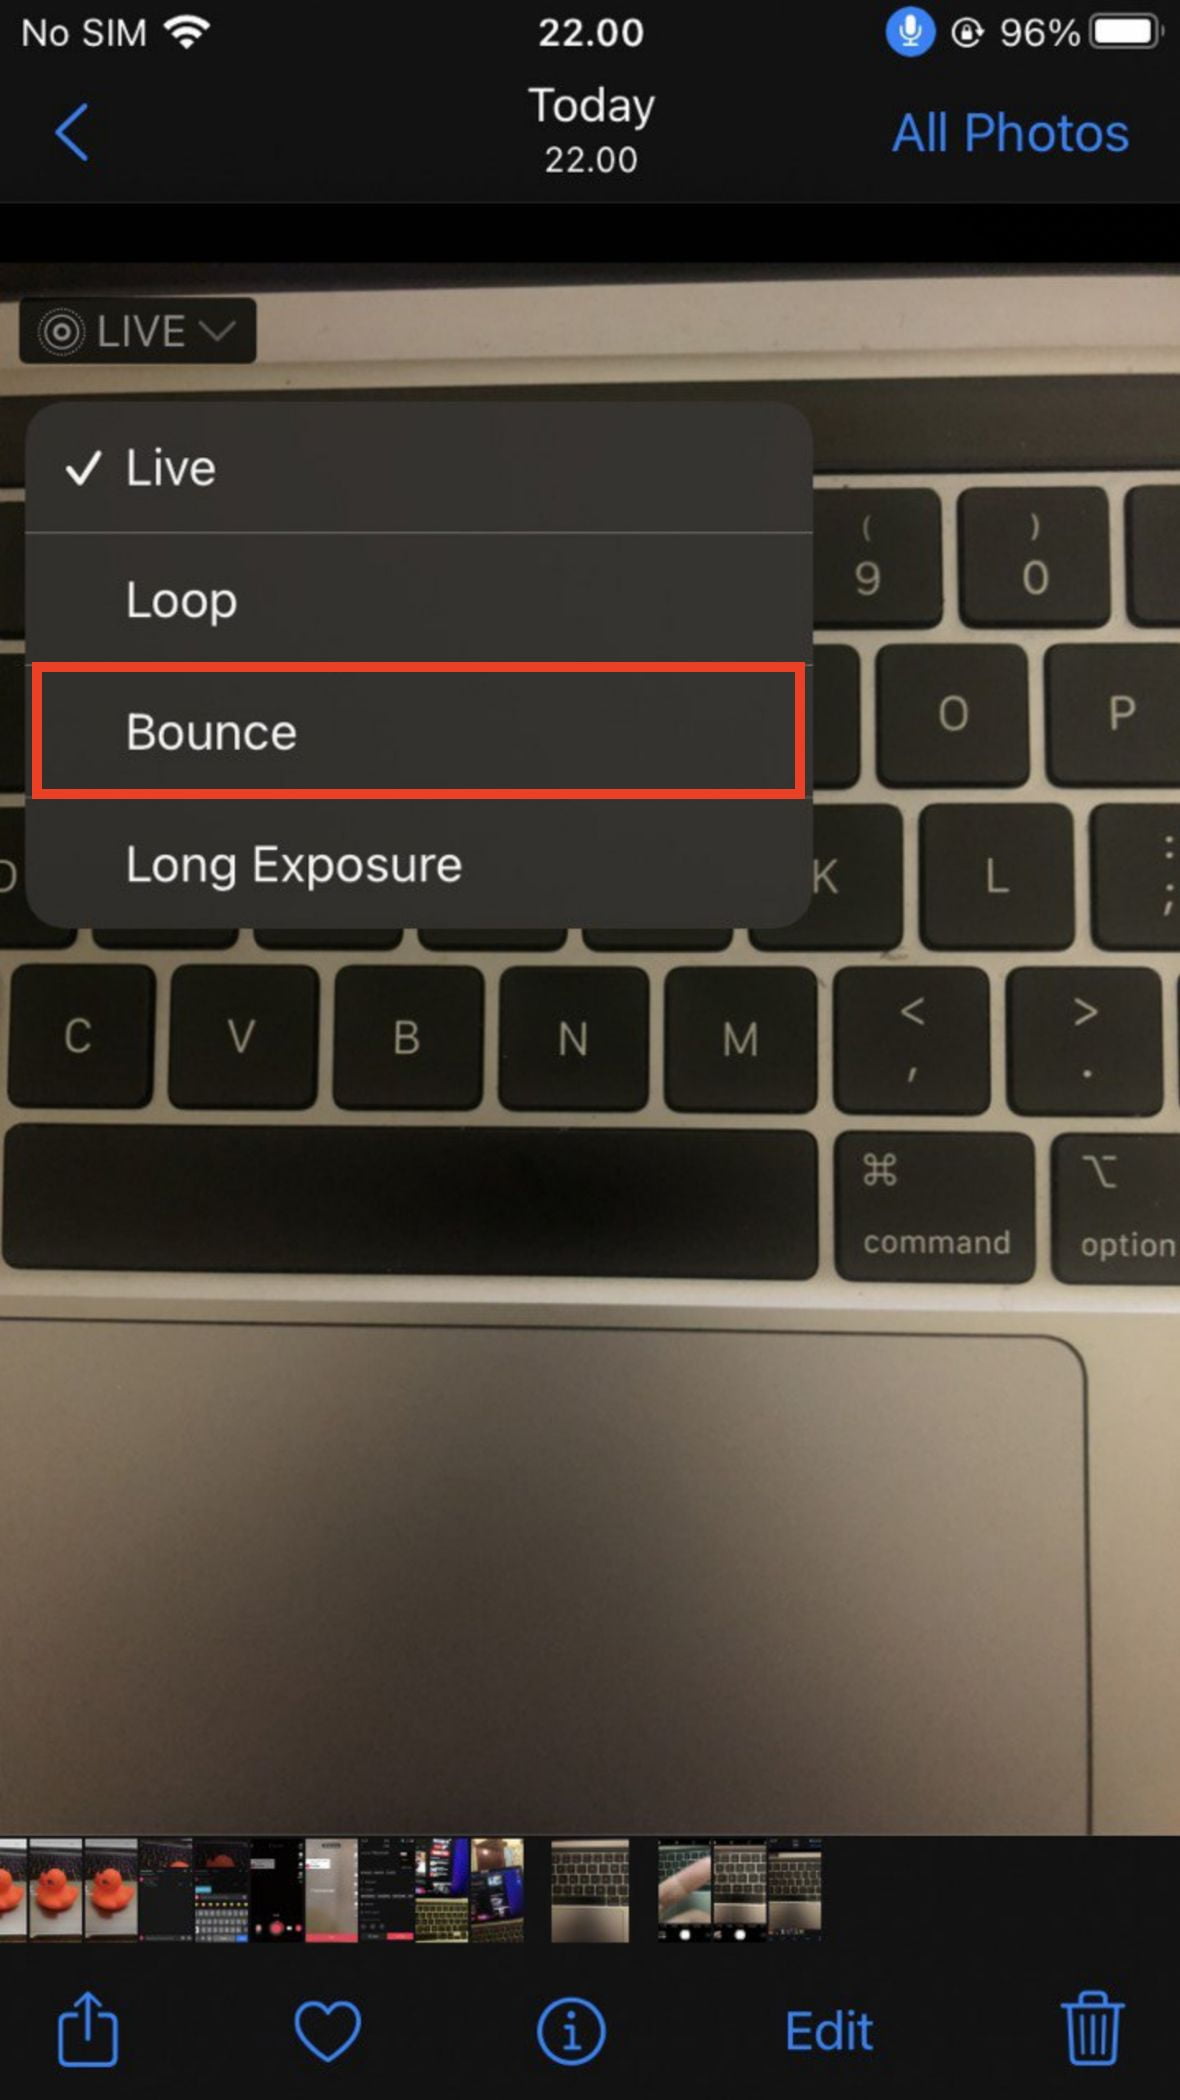 How to Enable Built-in Boomerang App on iPhone Live Photos